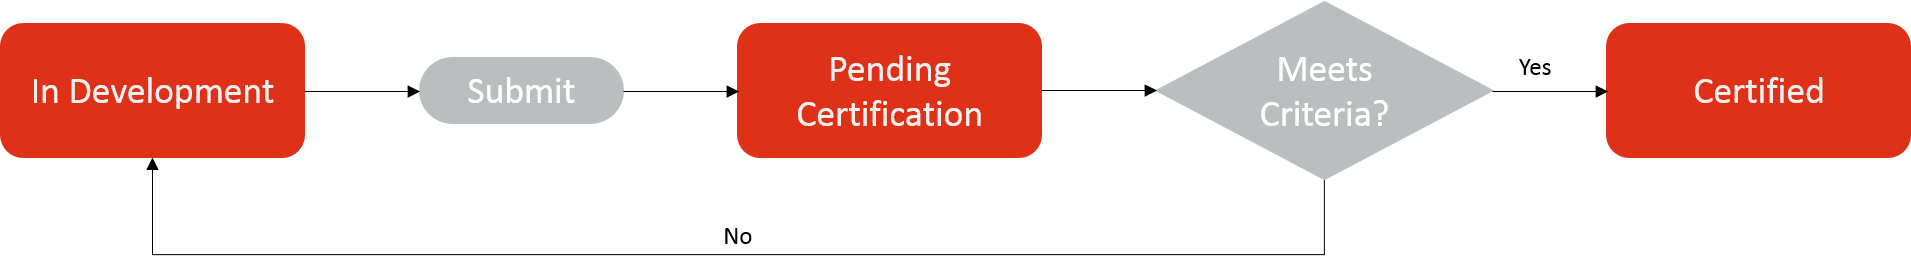 The application lifecycle: In Development, Pending Certification, and Certified